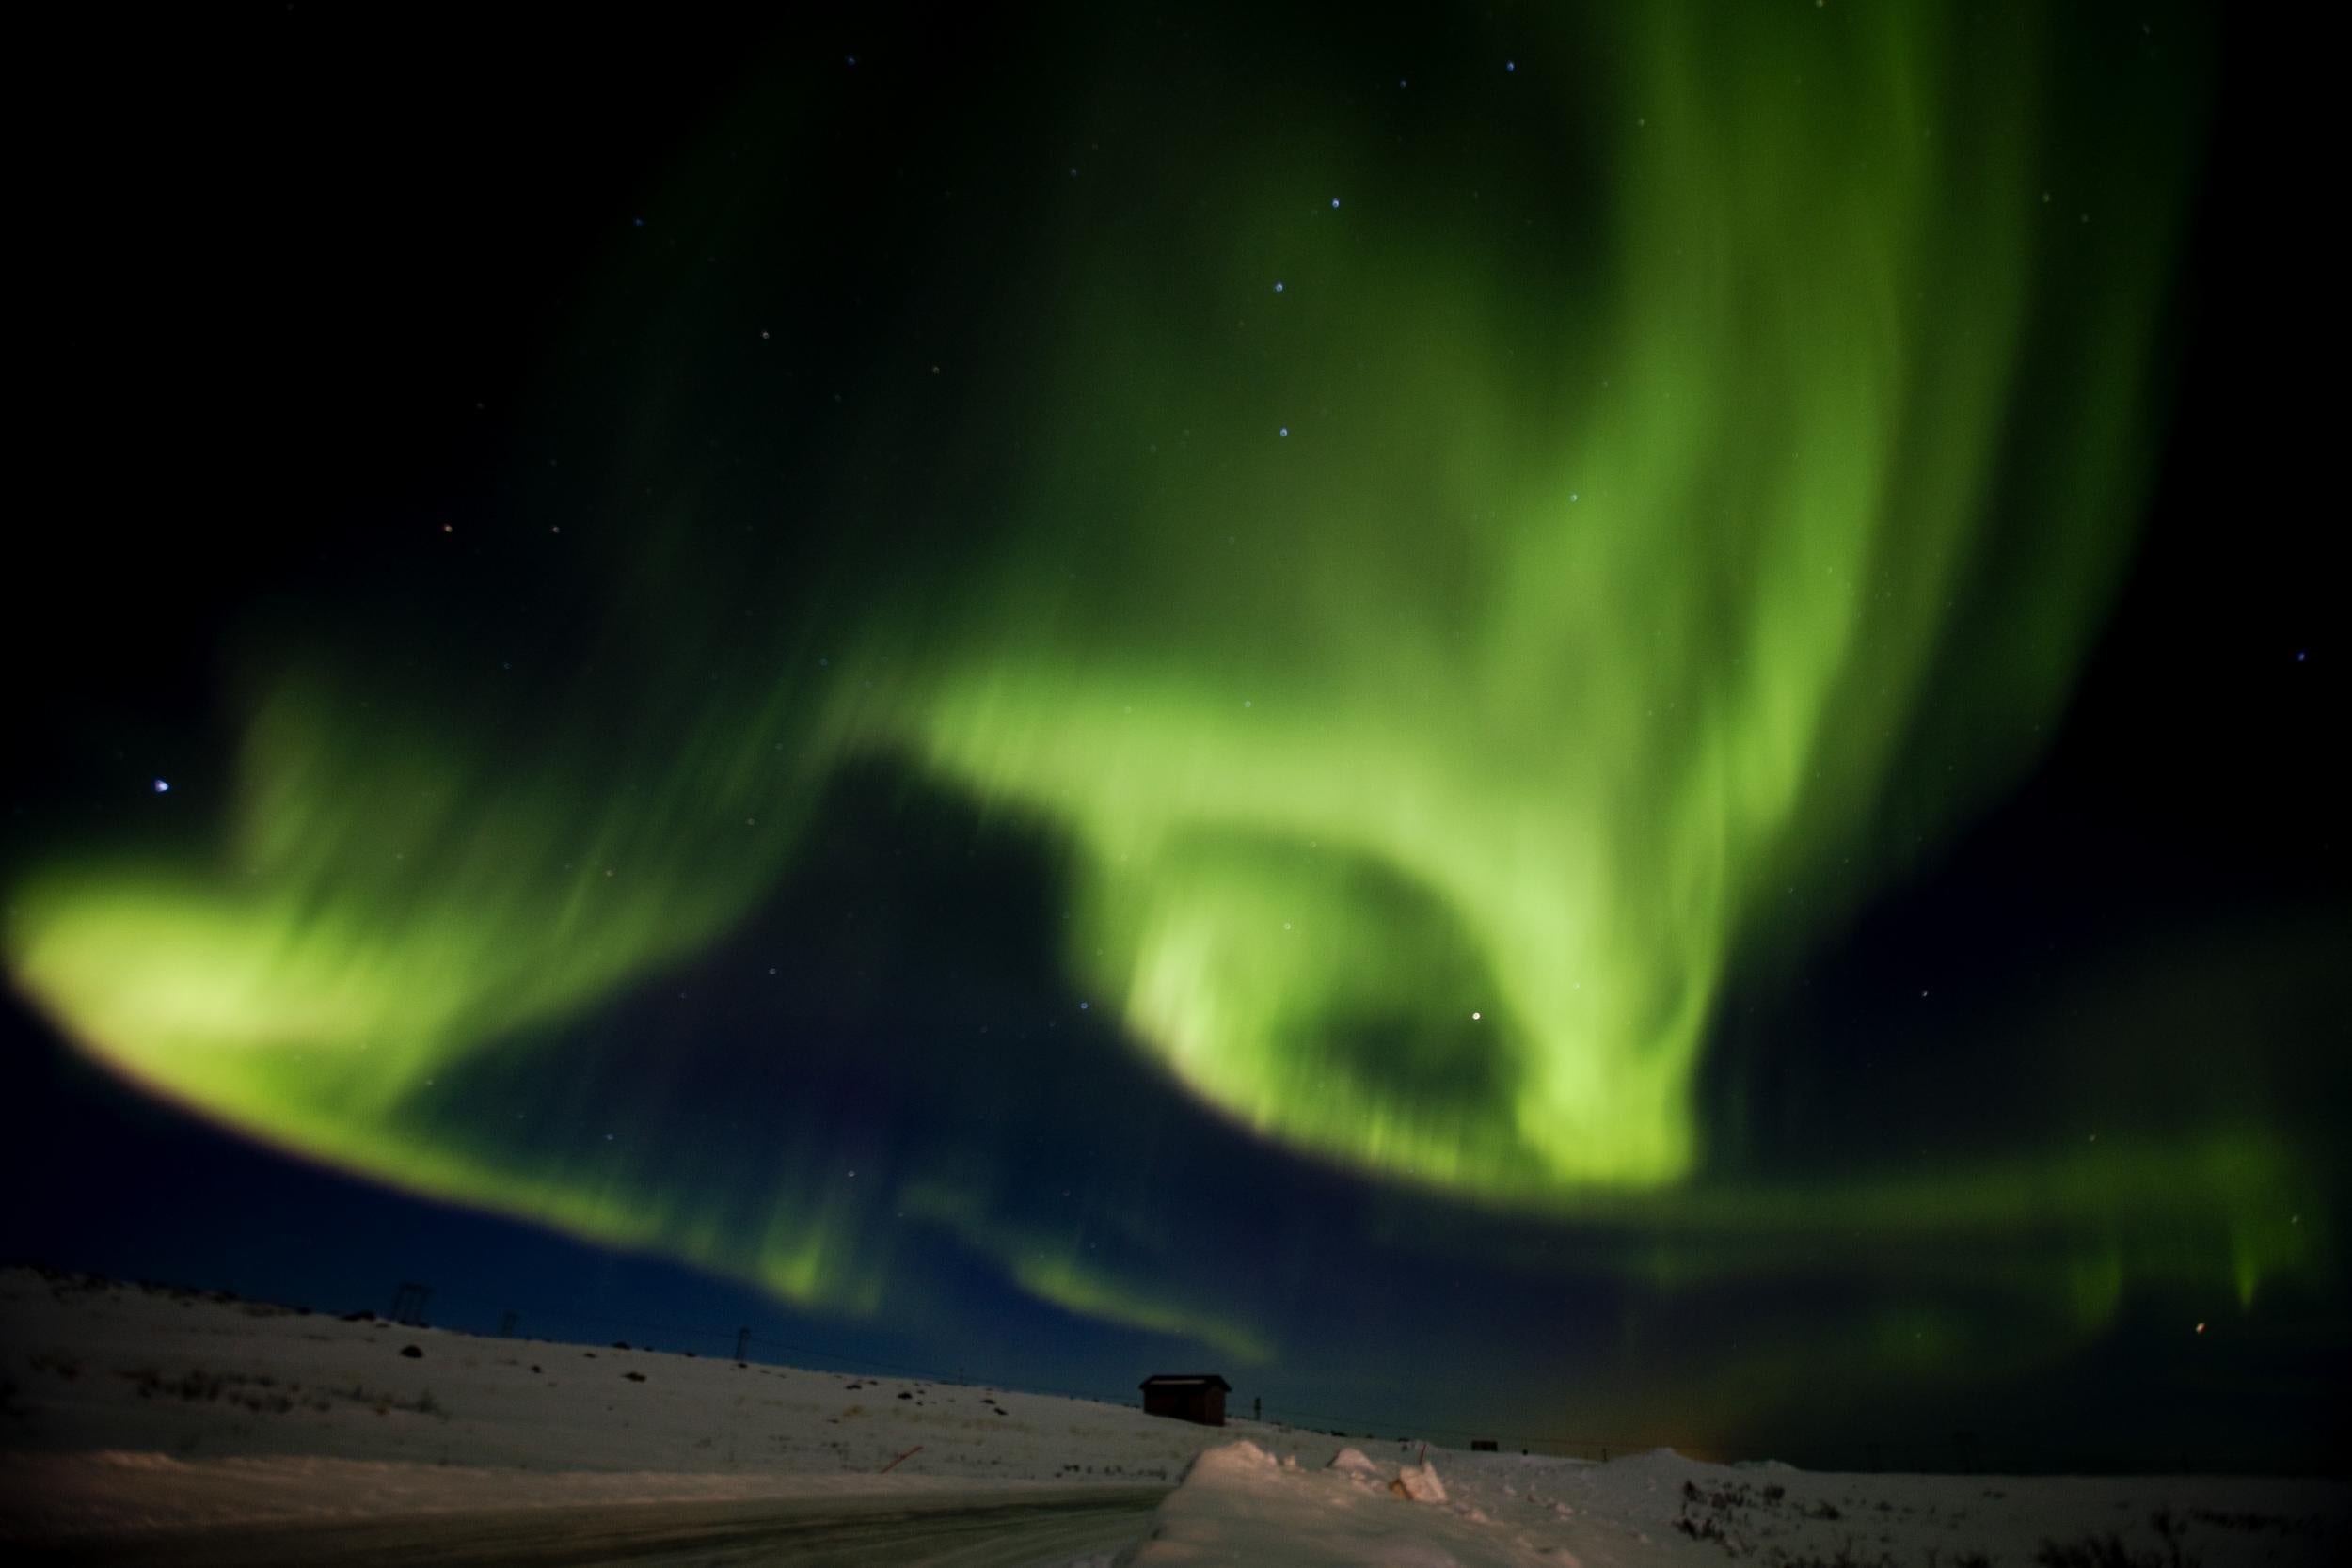 Typical Northern Lights photos are taken with long exposures